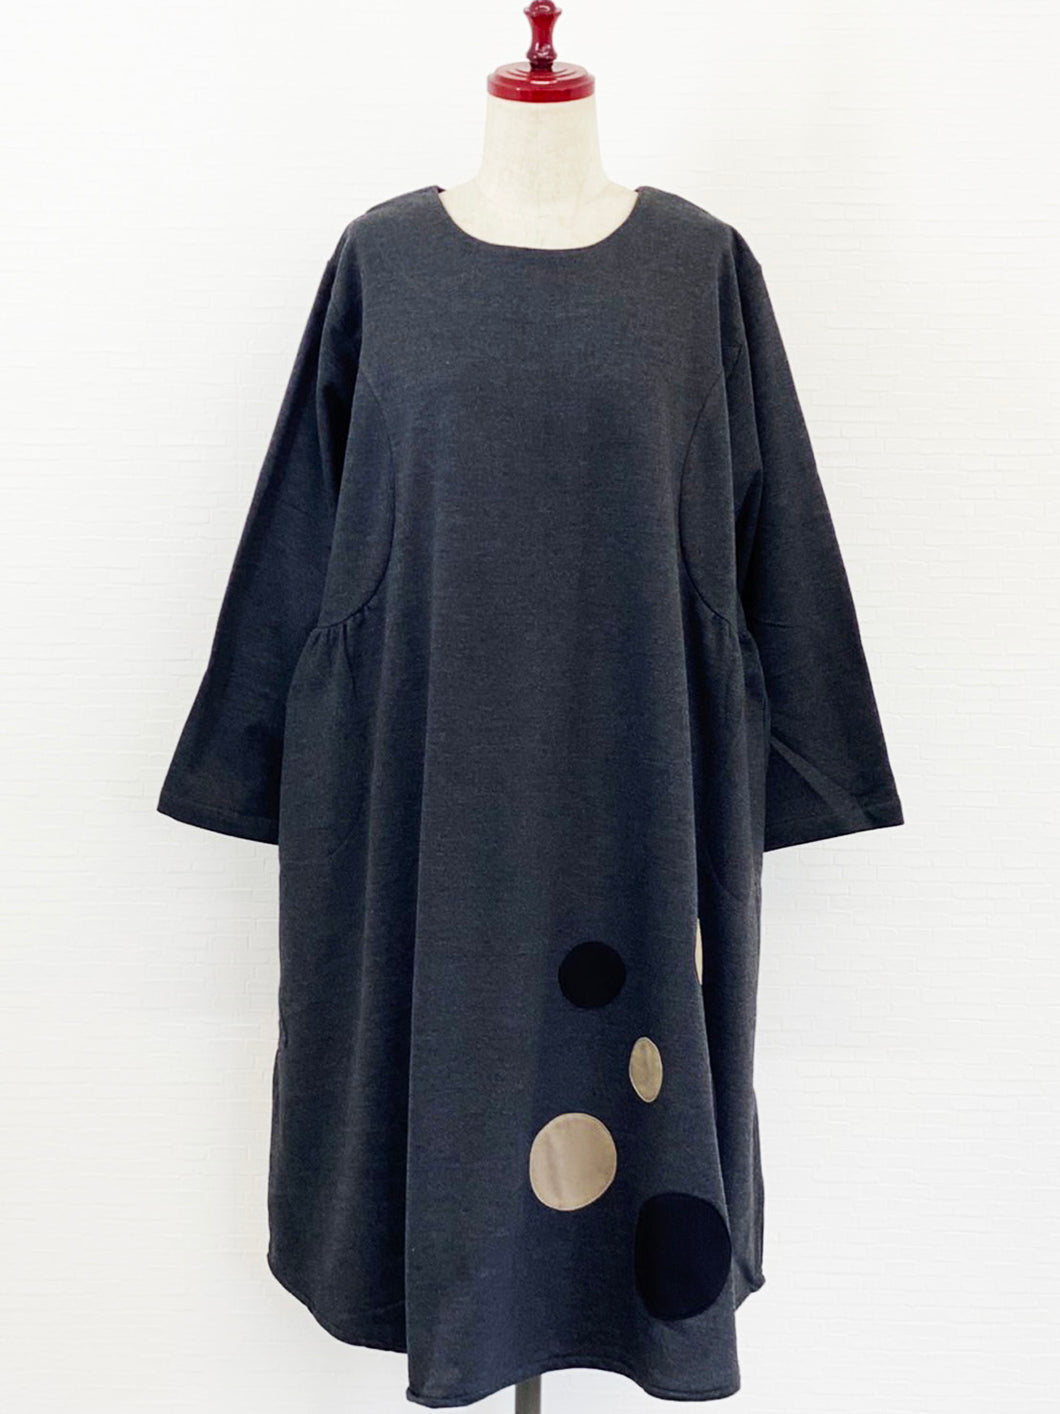 Tuck Dress - Fleece - Solid with Circle Patches - Charcoal